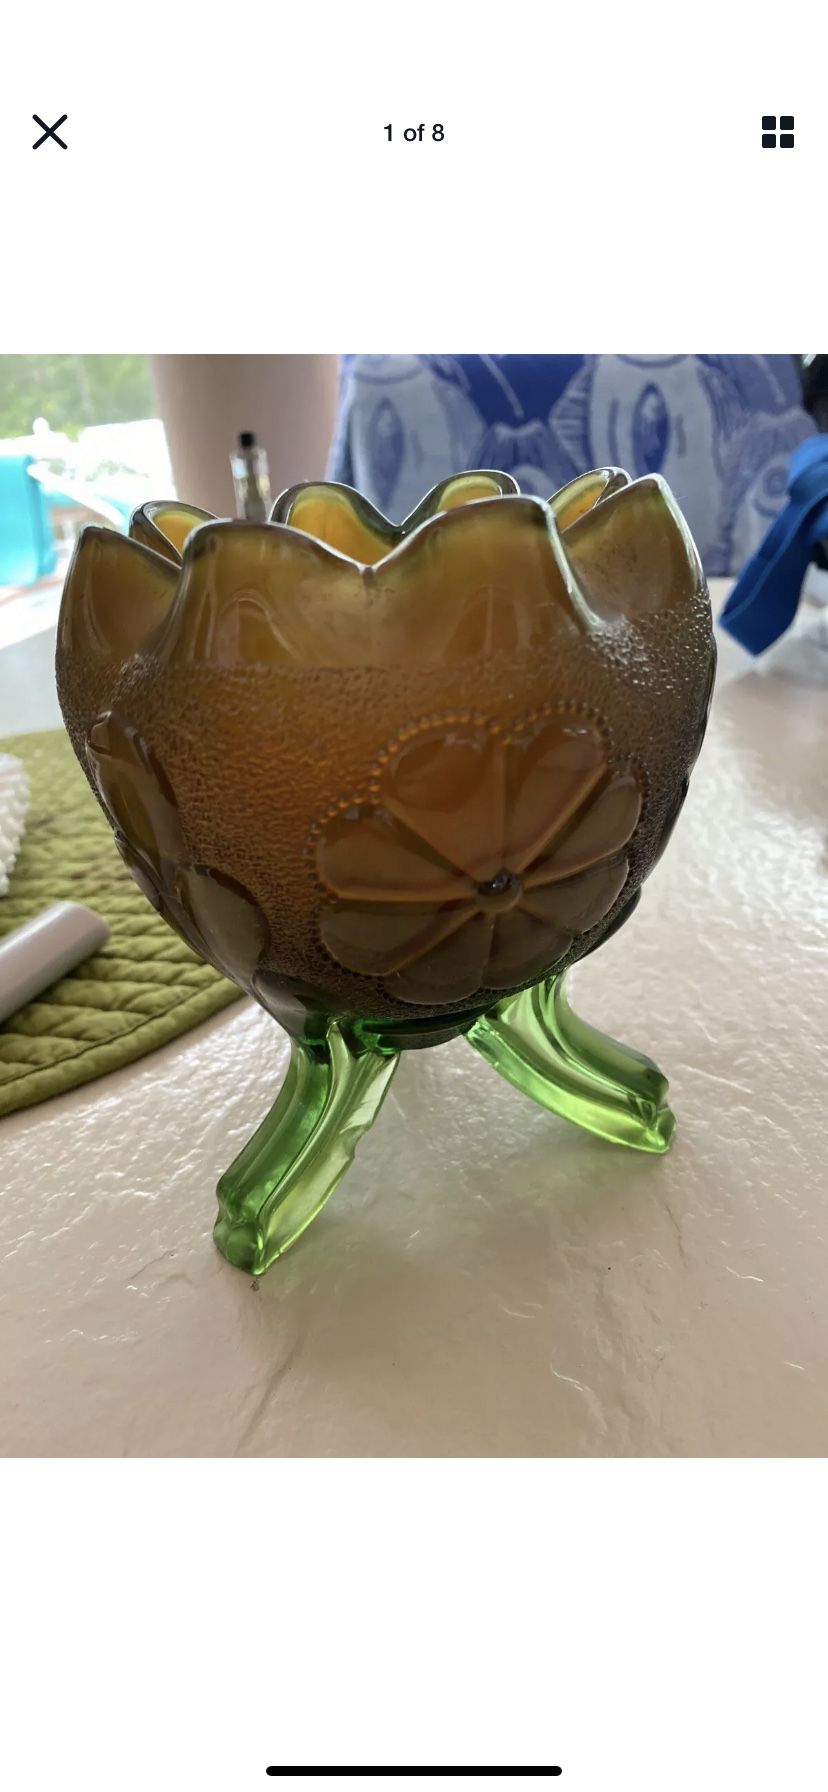 Northwood DAISY & PLUME ANTIQUE CARNIVAL ART GLASS FTD ROSE BOWL Brown And Green